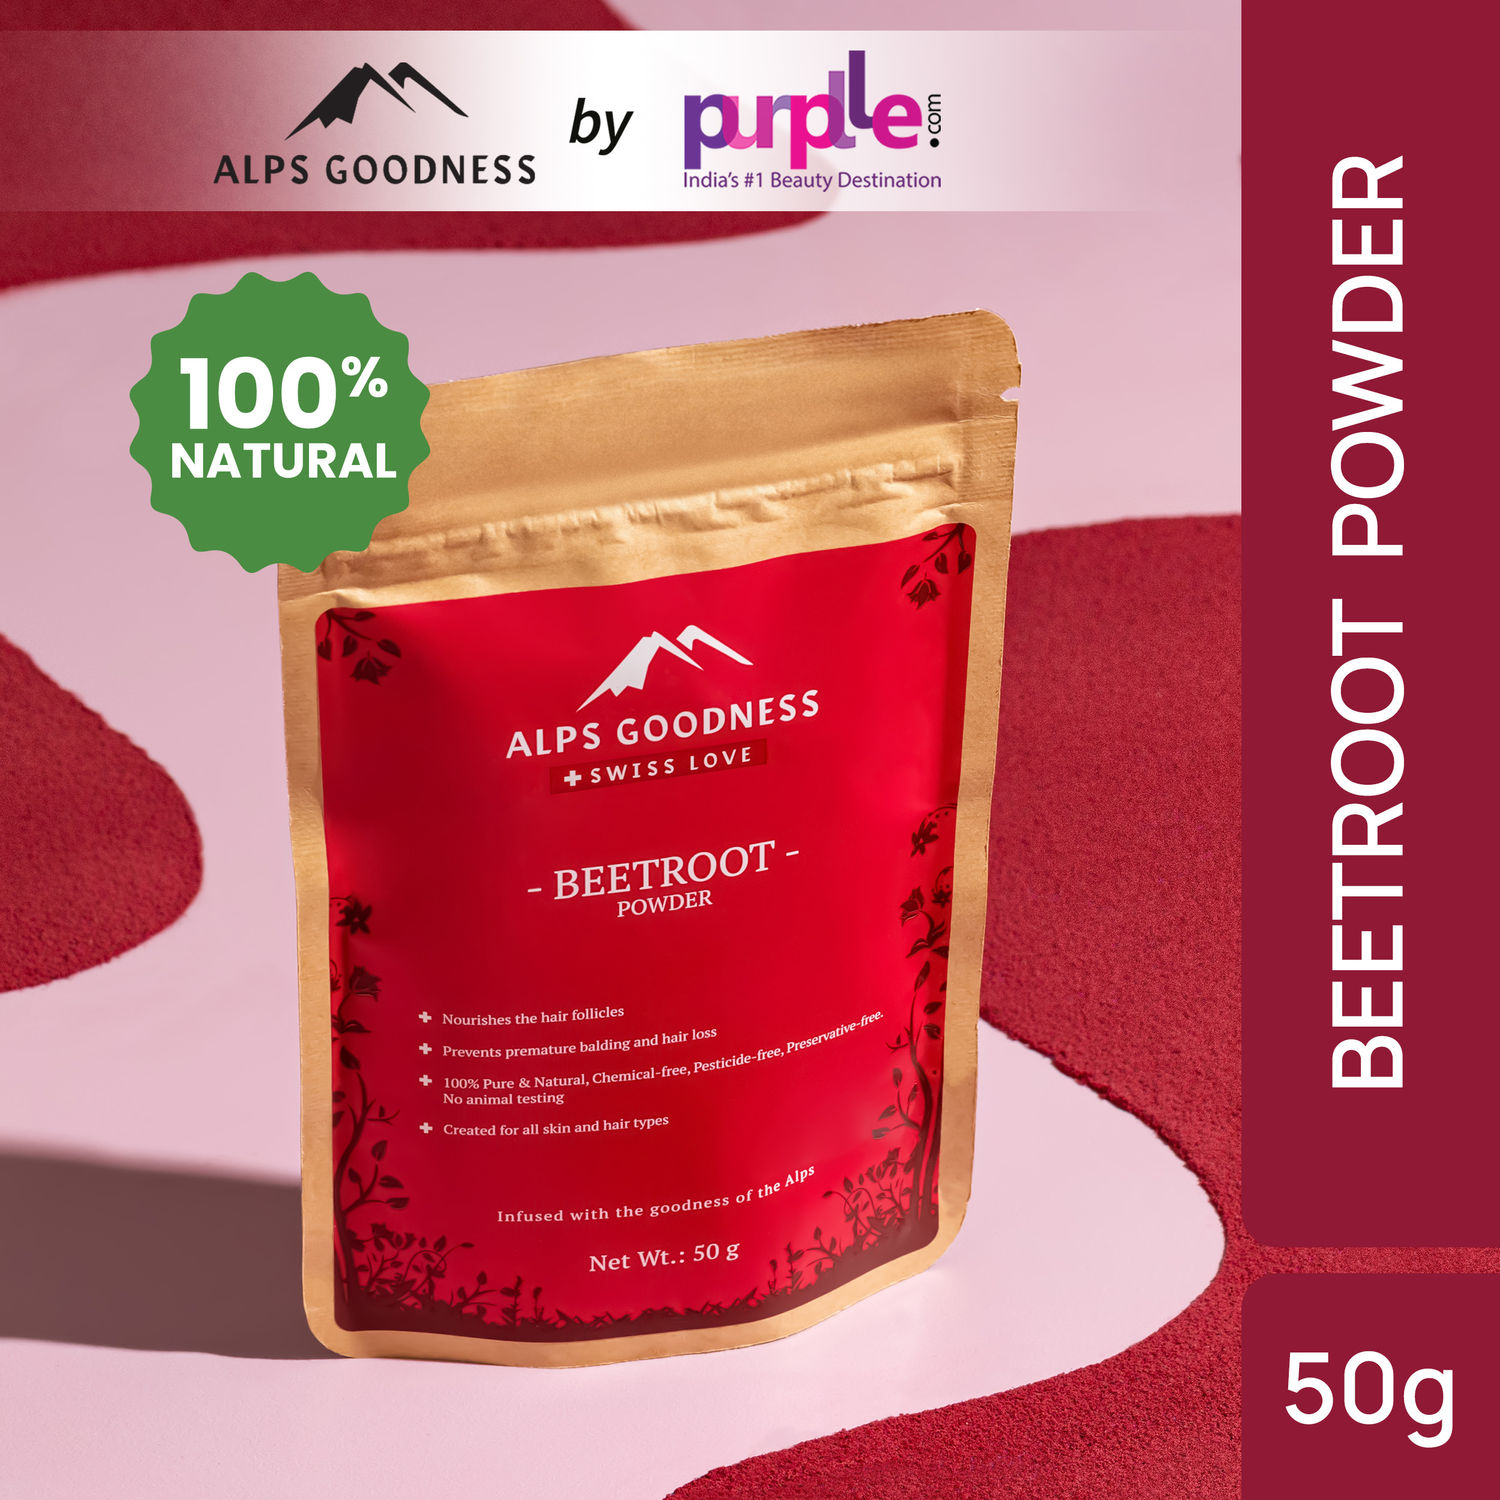 Alps Goodness Powder - Beetroot (50 g)| 100% Natural Powder | No Chemicals, No Preservatives, No Pesticides | Can be used for Hair Mask and Face Mask | Nourishes hair follicles| Face Pack for brightening skin complexion | Hair Spa